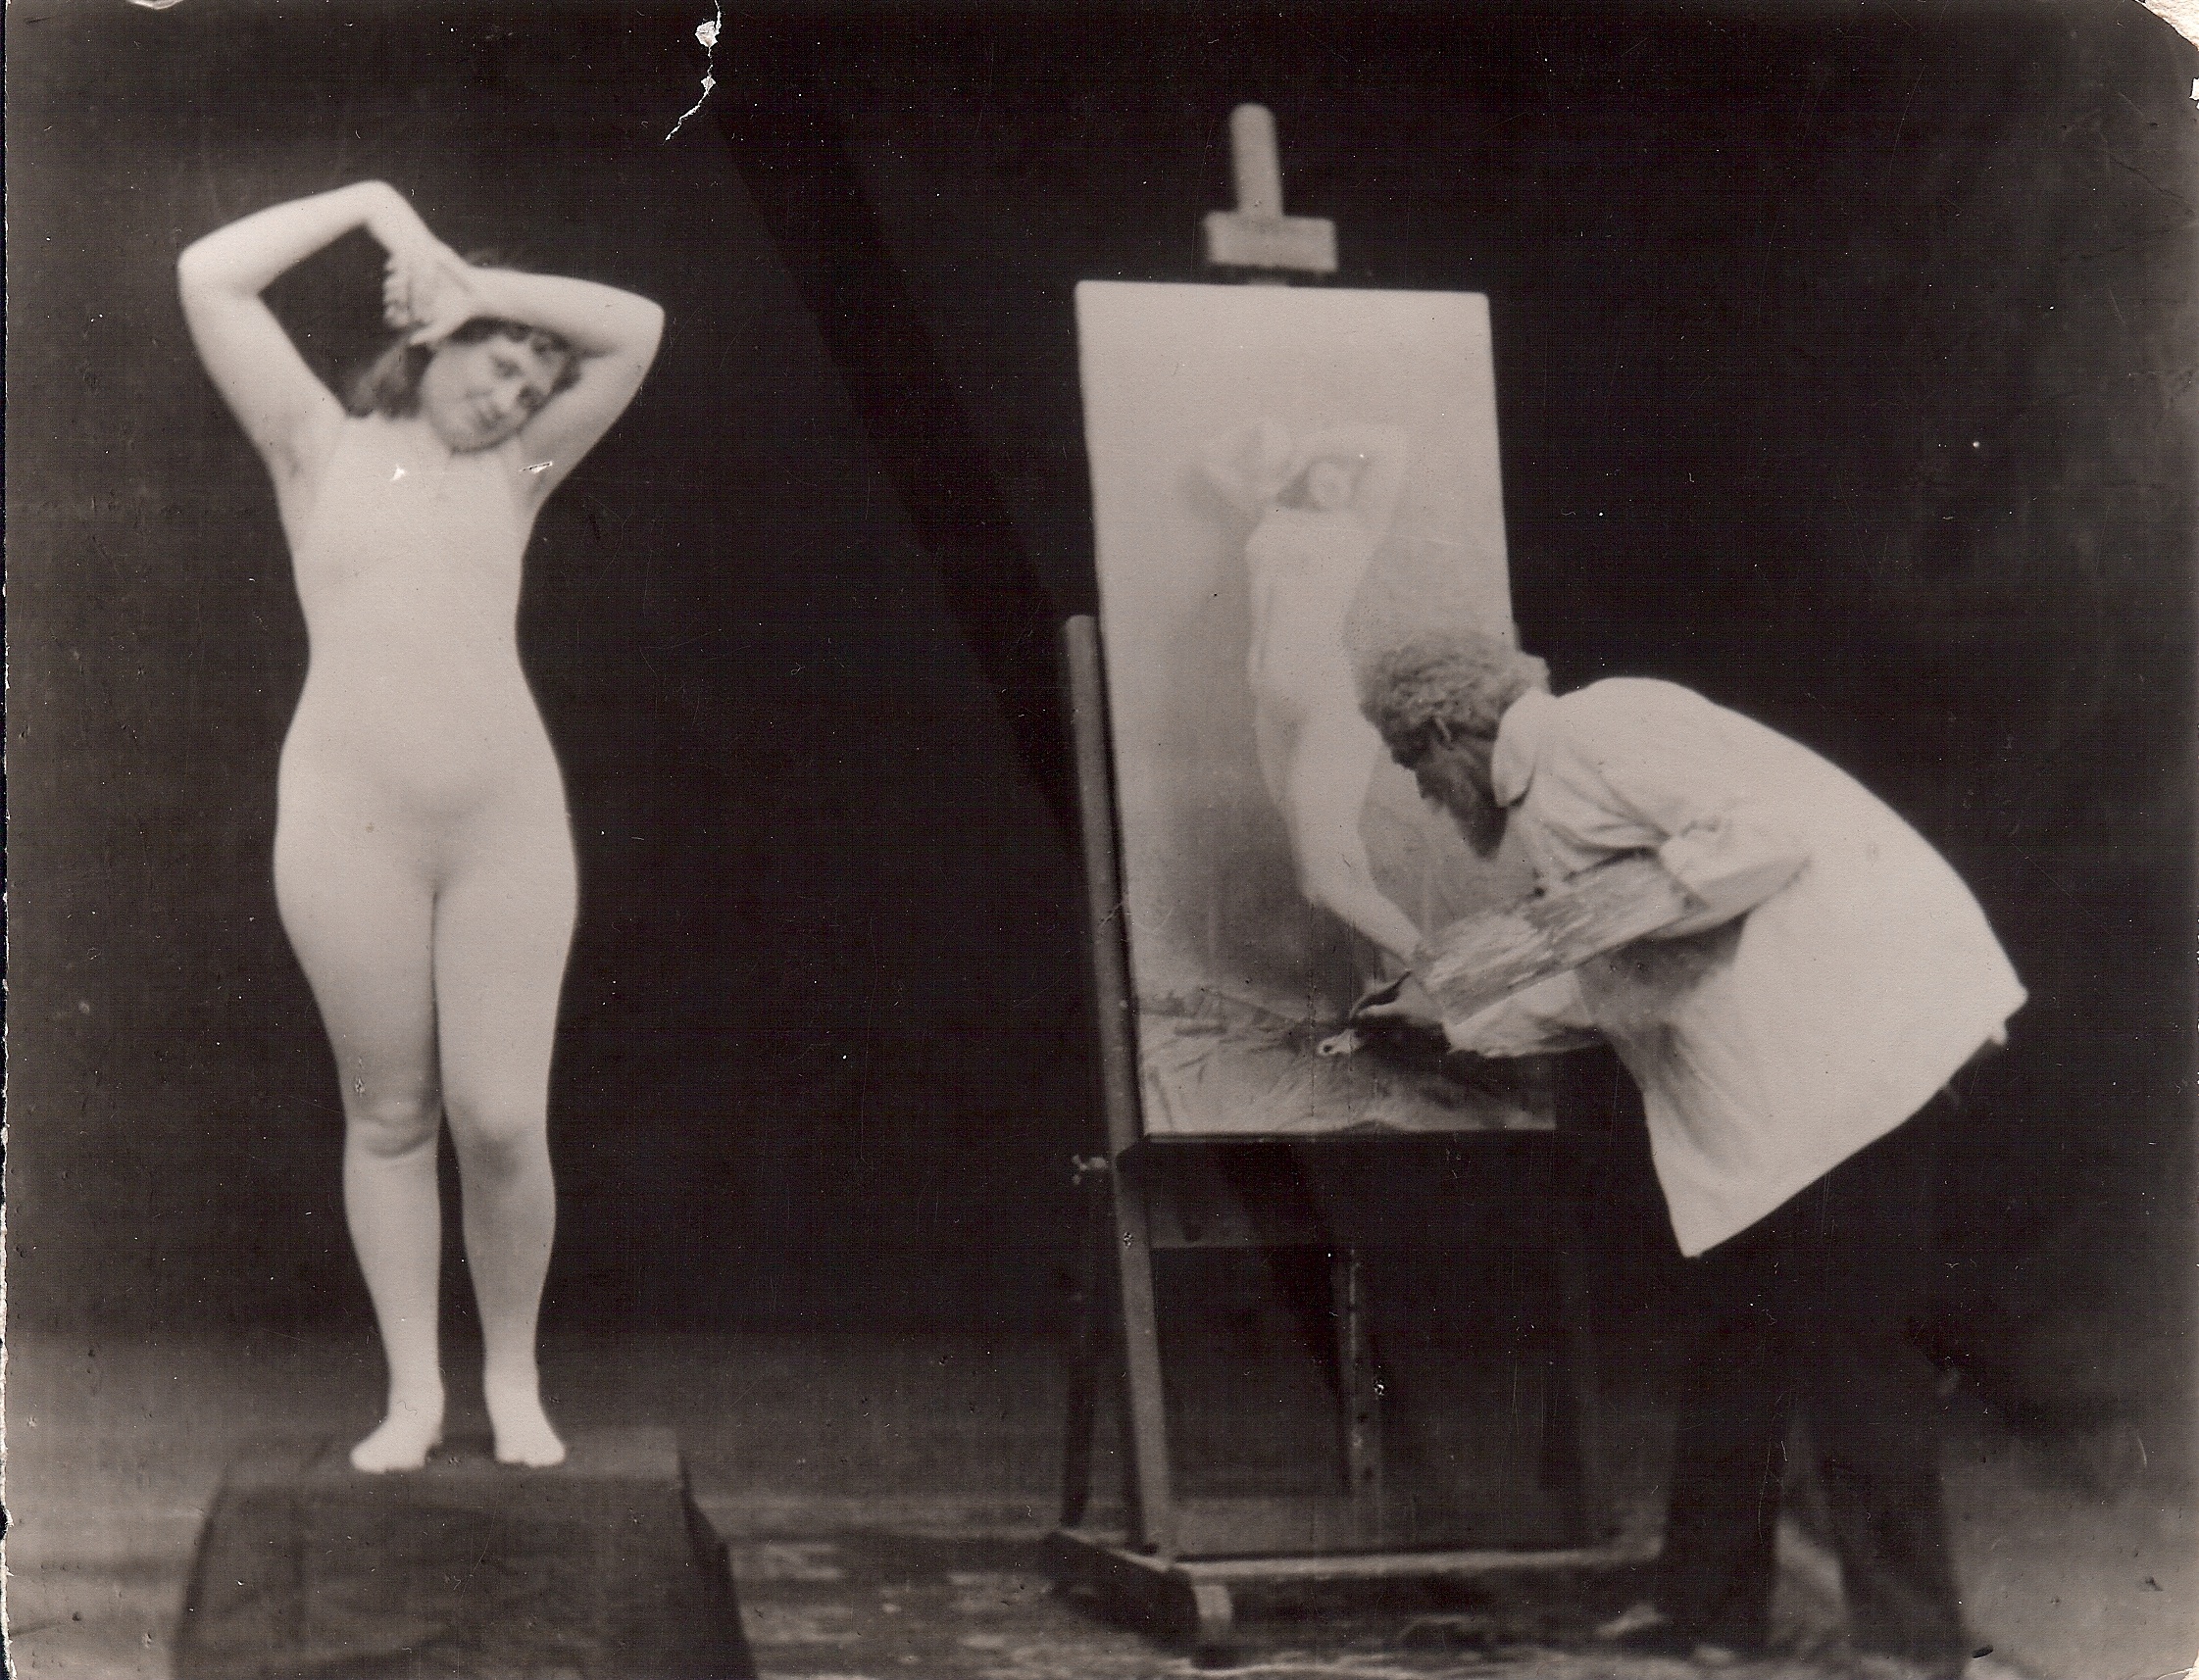 Artist and Model, photography, c.1900